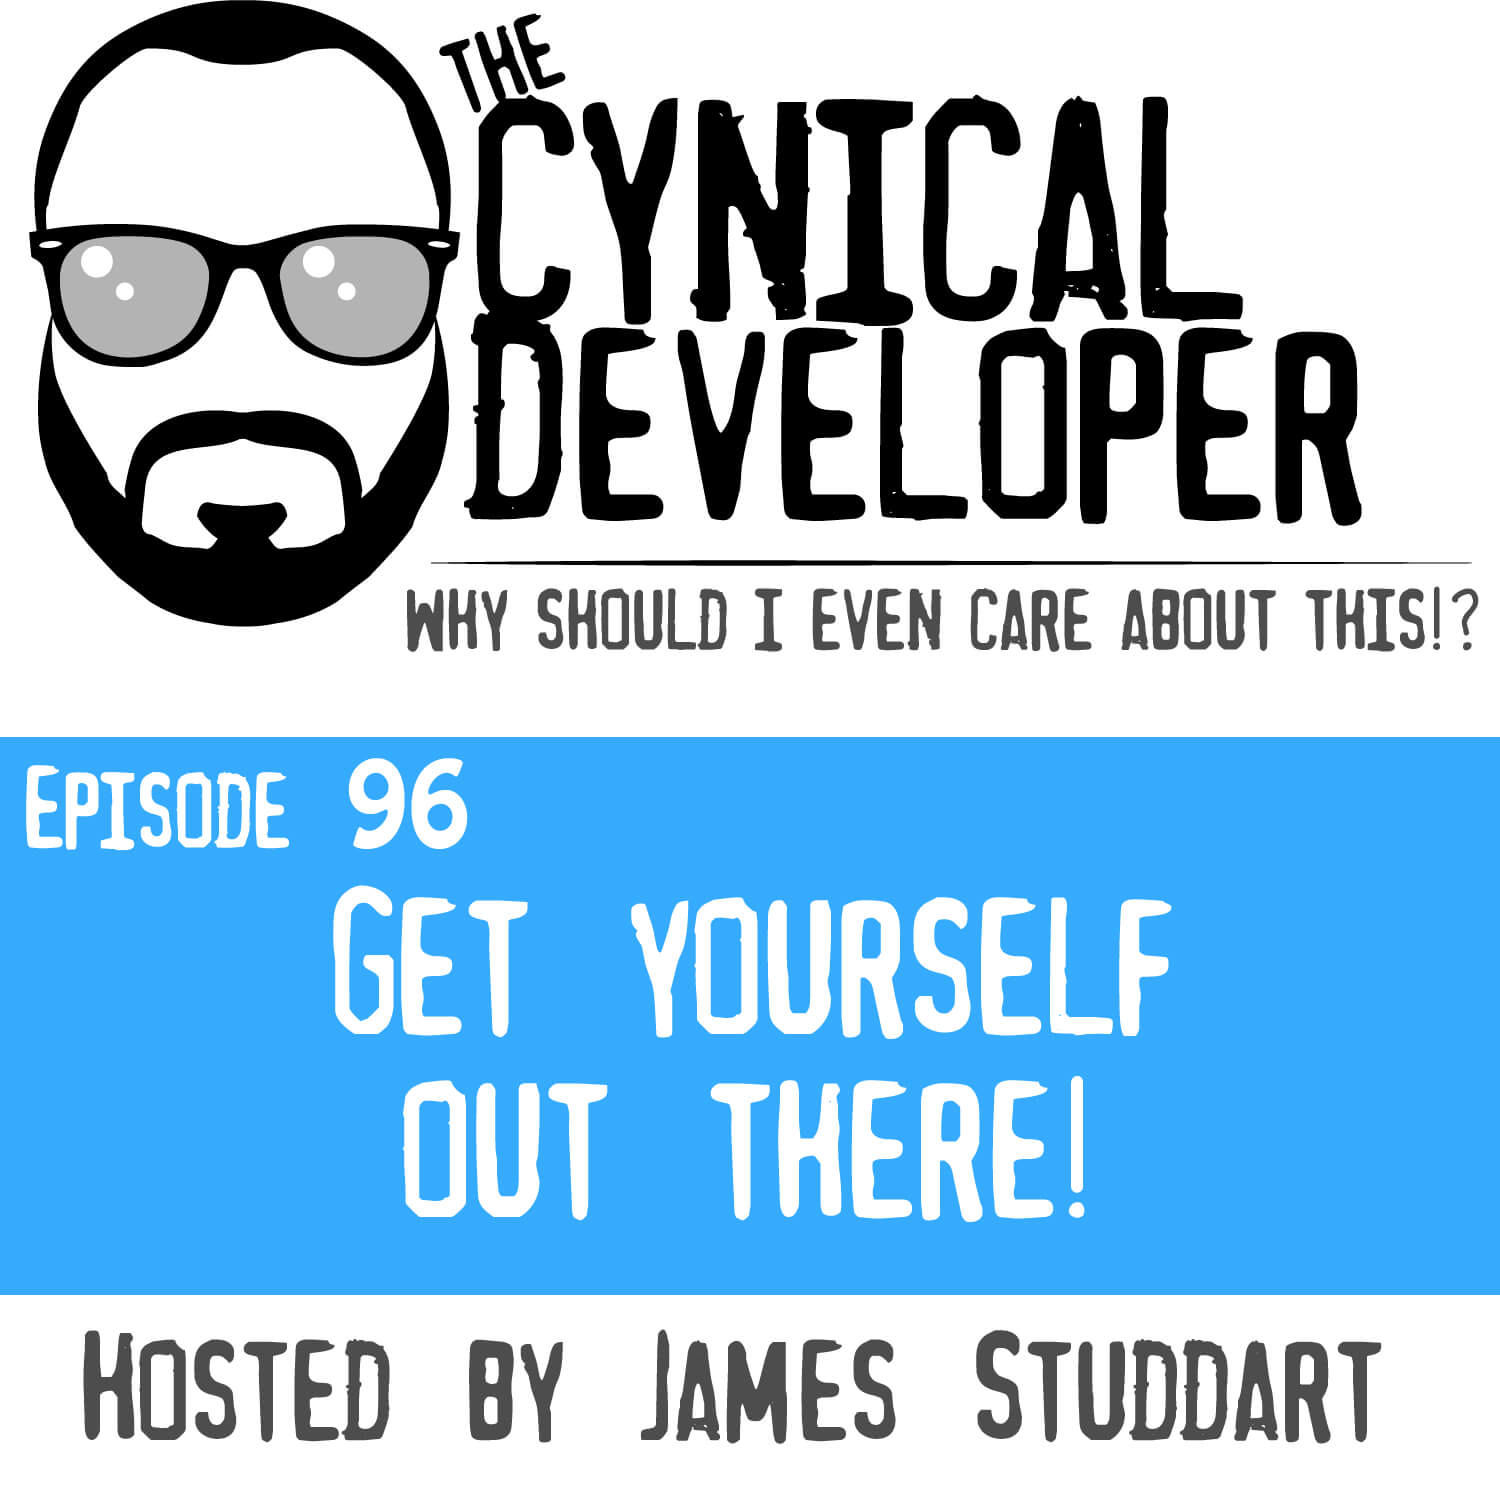 Episode 96 - Get yourself out there